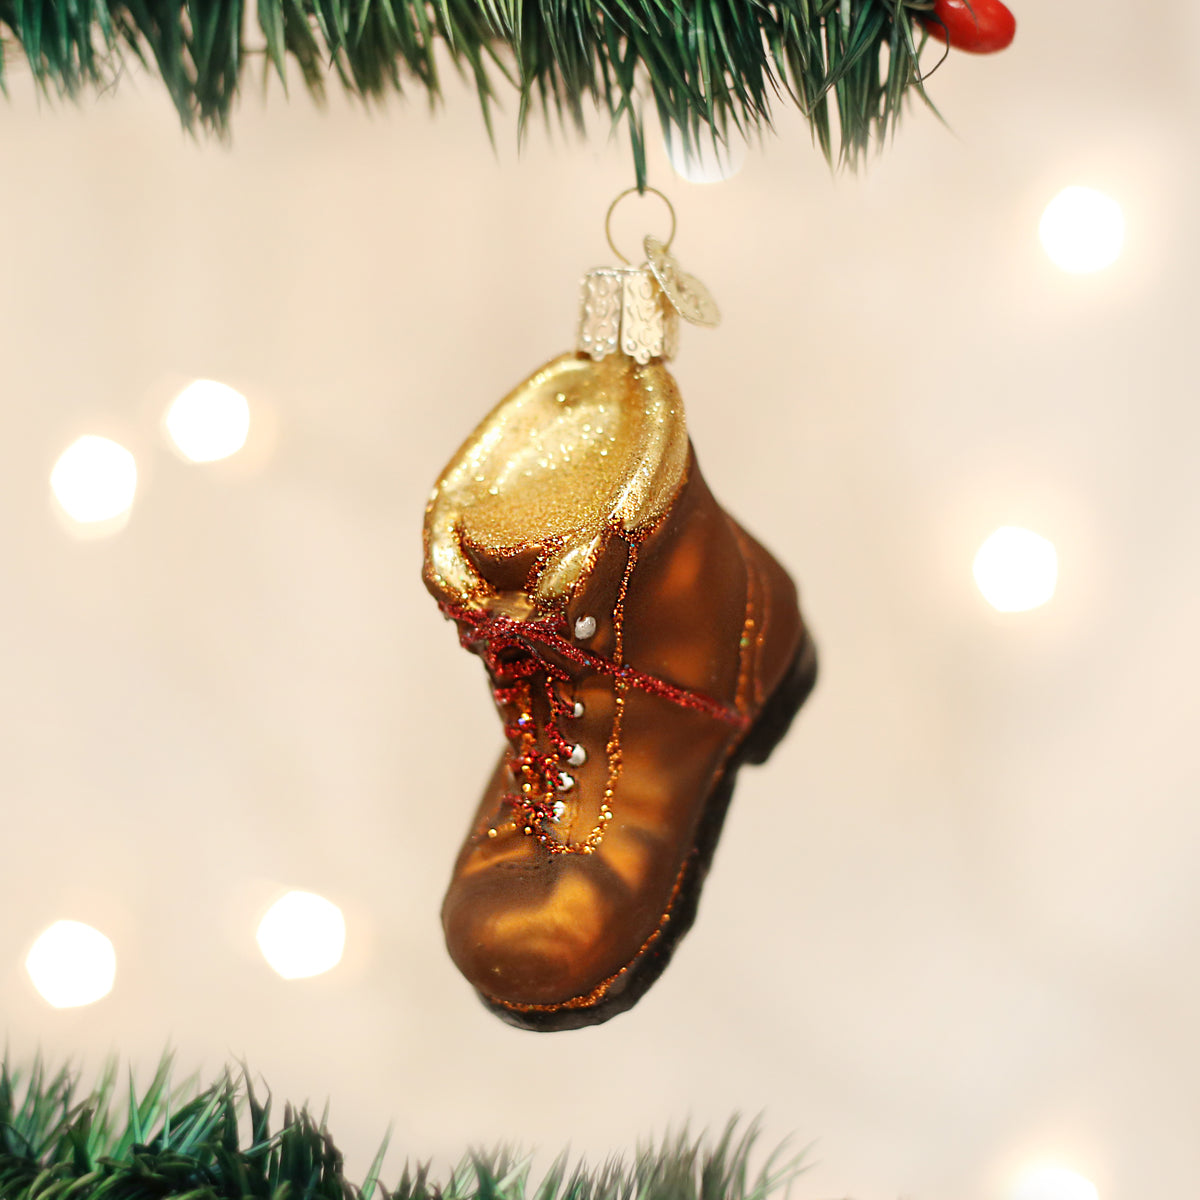 Old Hiking Boots Filled With Sweets Gifts And Christmas Decoration